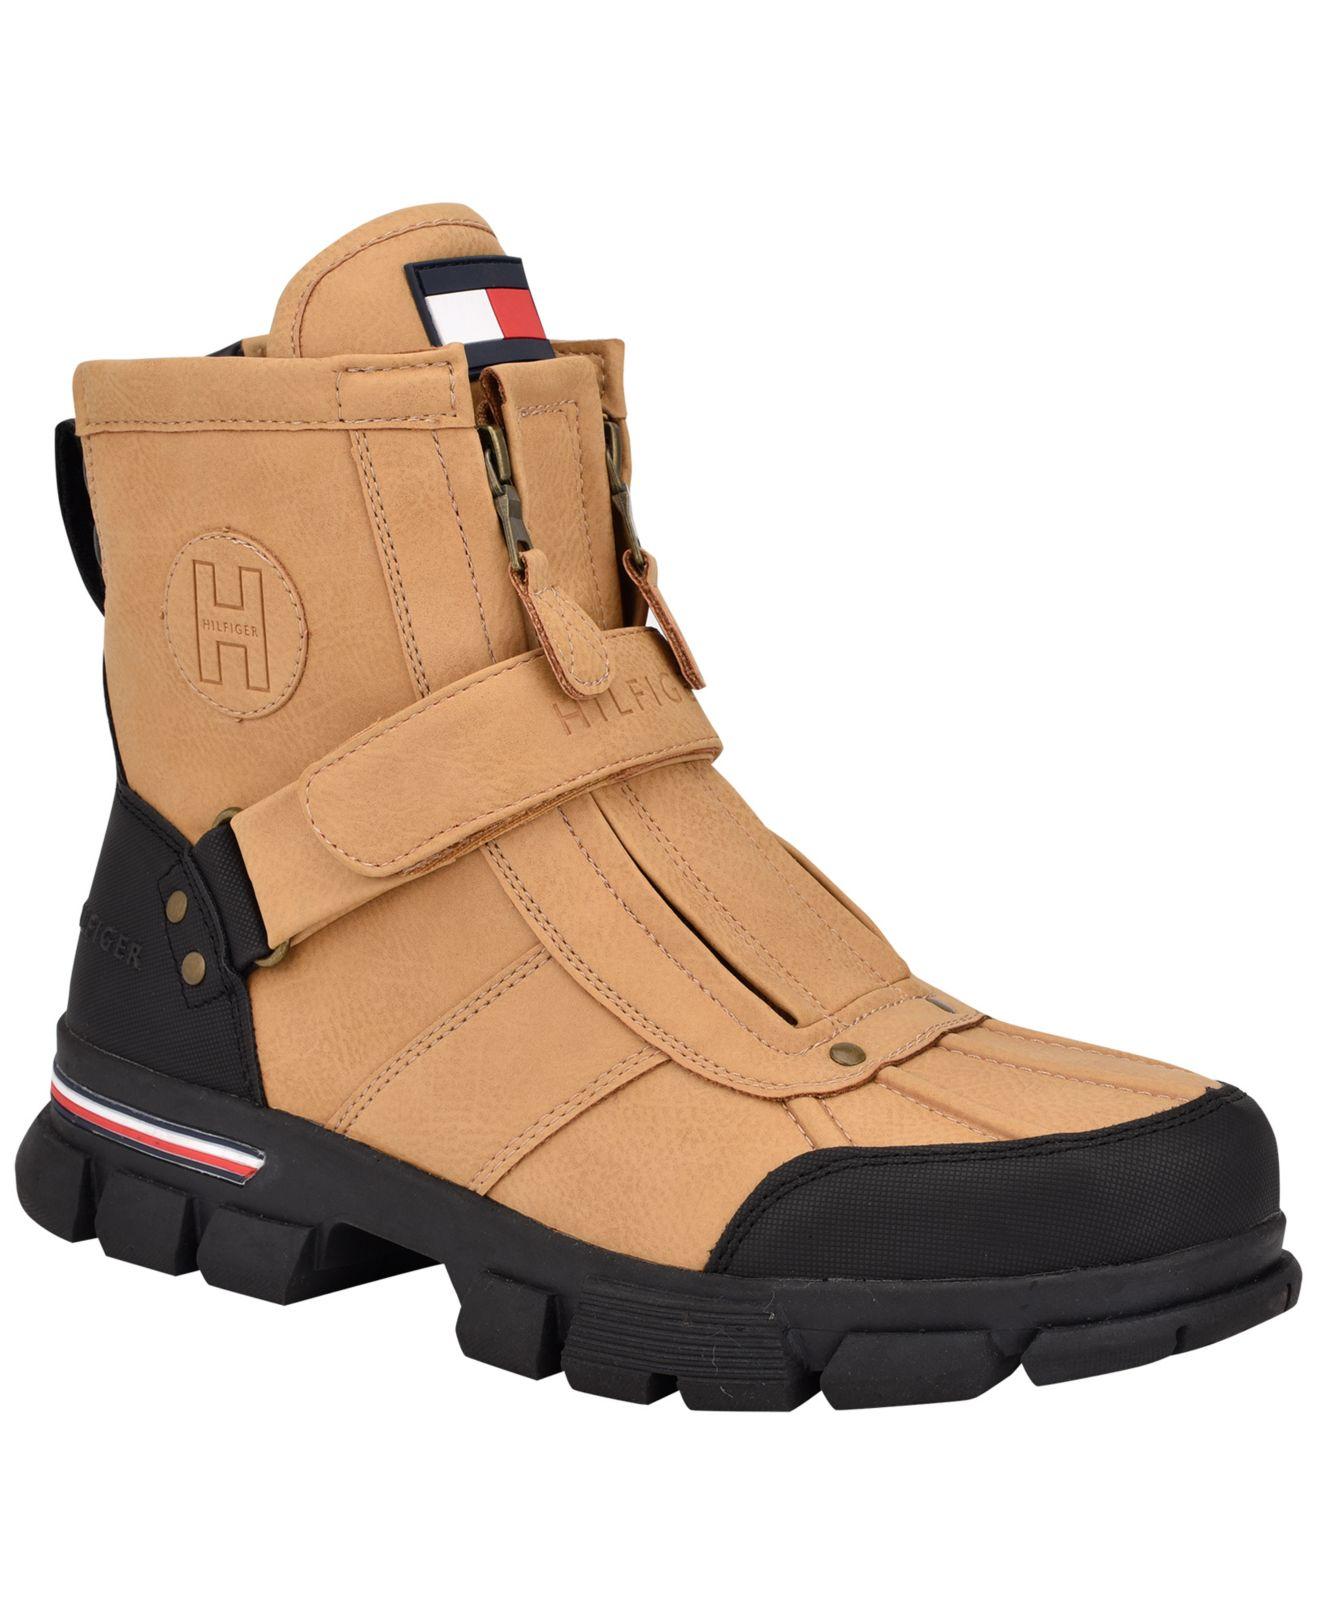 Tommy Hilfiger Imperial Zip Boots for Men - Lyst